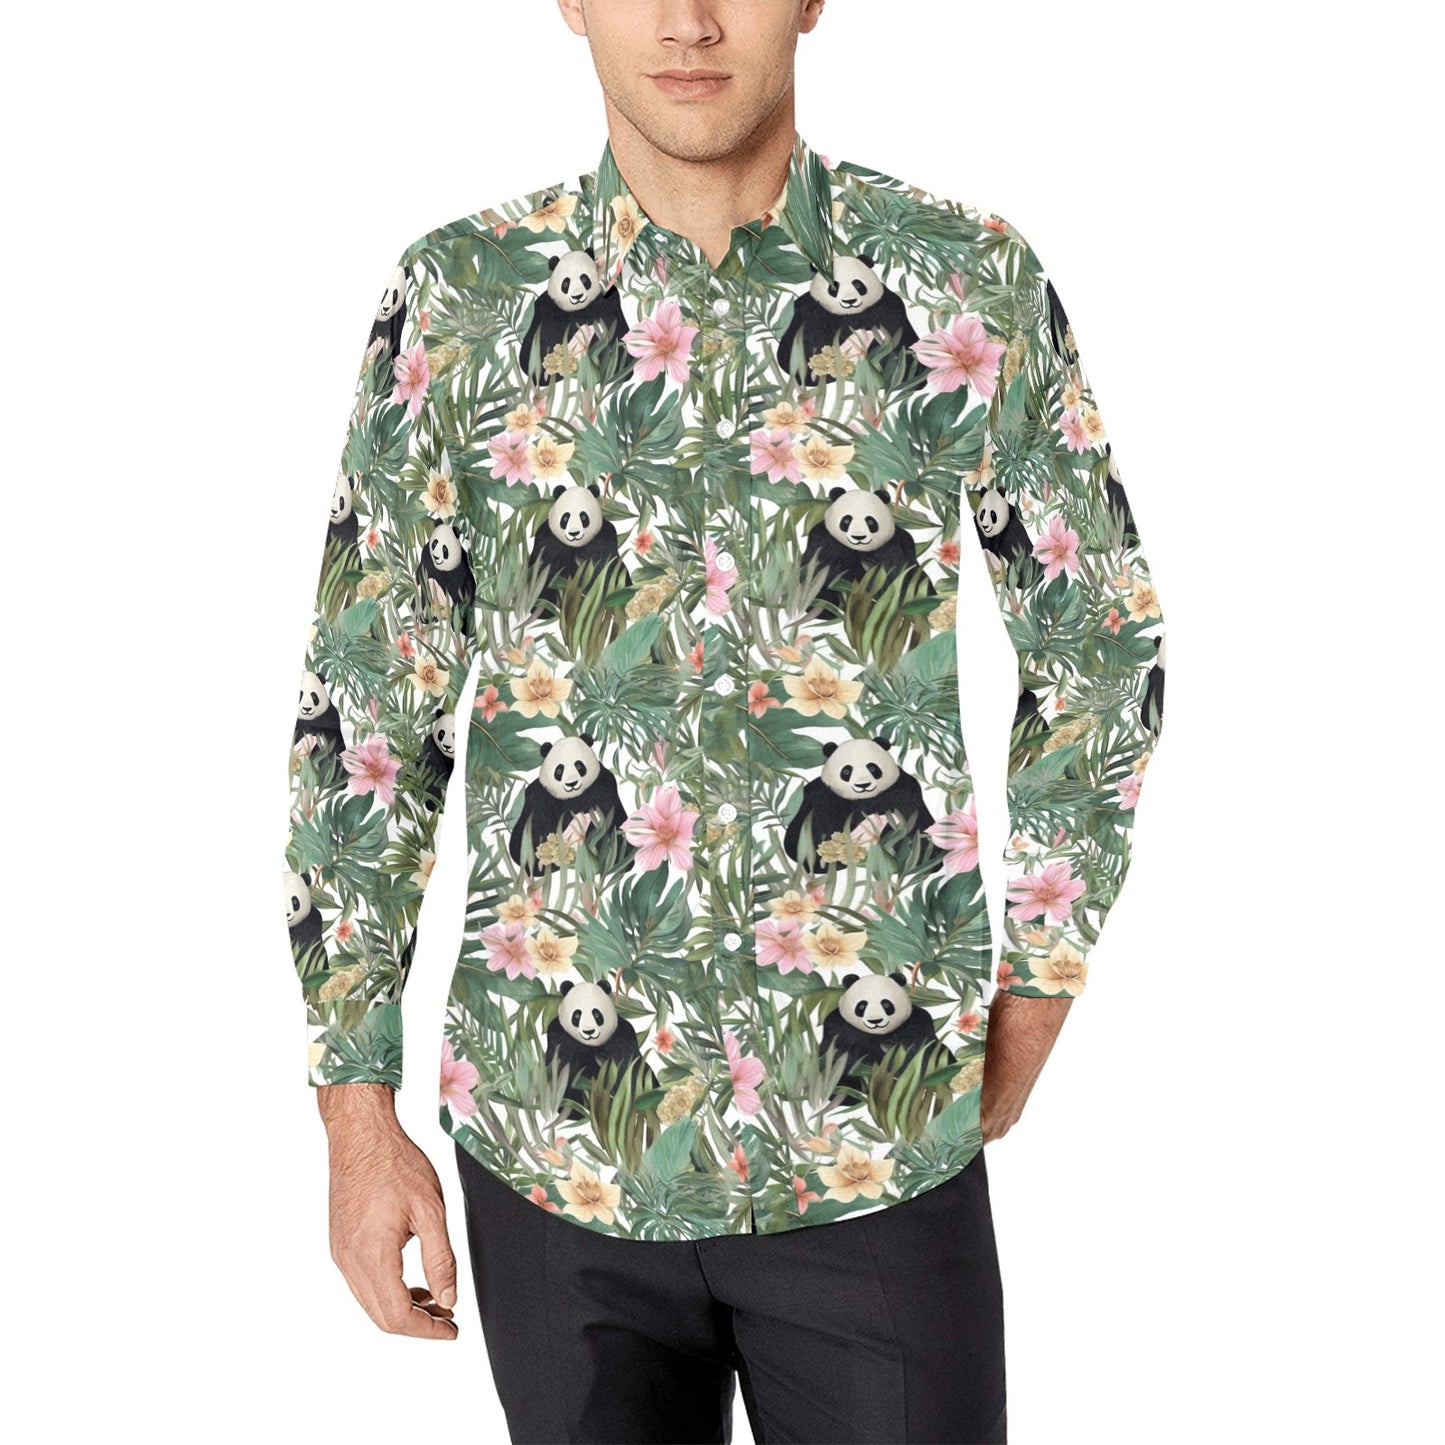 Panda Tropical Leaves Long Sleeve Men Button Up Shirt, Green Floral Summer Print Dress Buttoned Collar Casual Dress Shirt with Chest Pocket Starcove Fashion